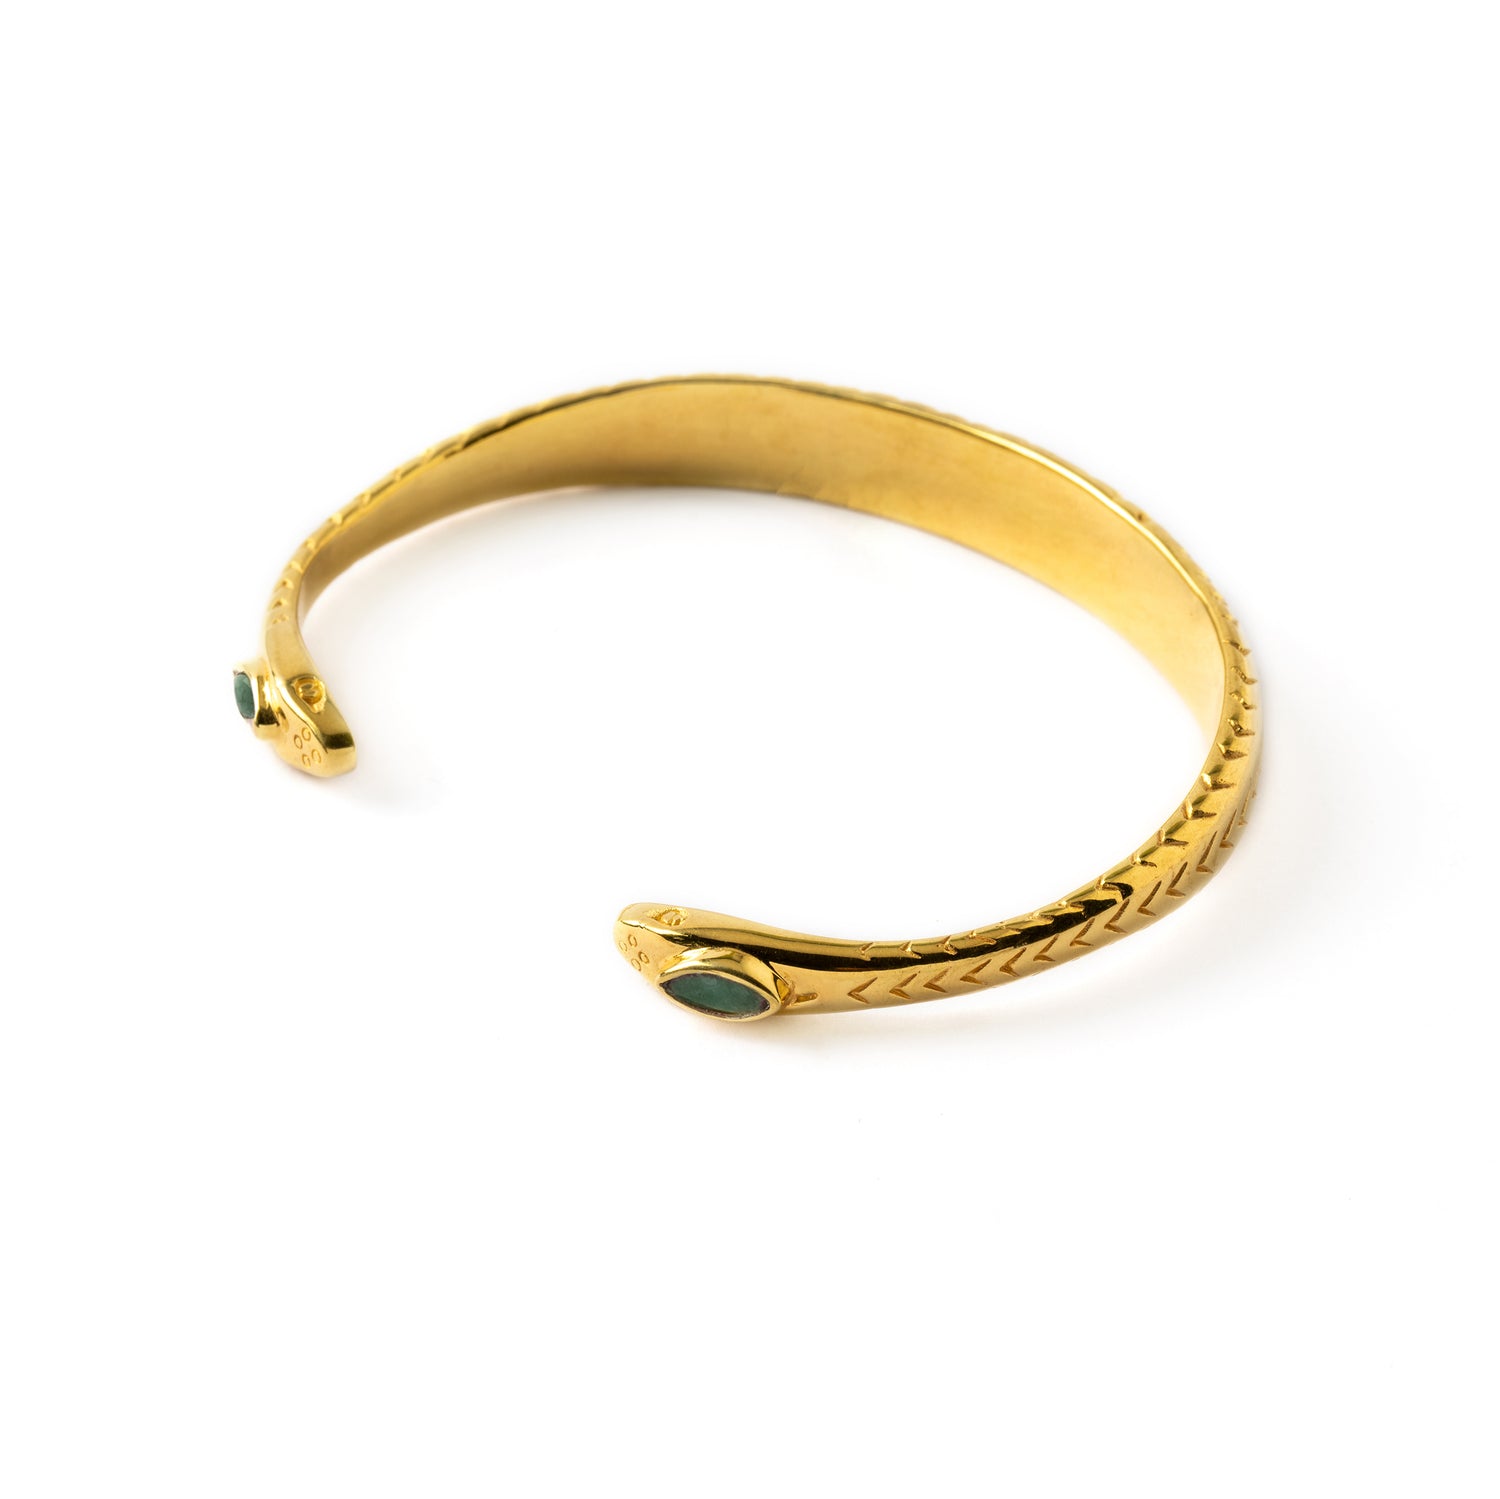 Naga Gold Cuff with Emerald left side view